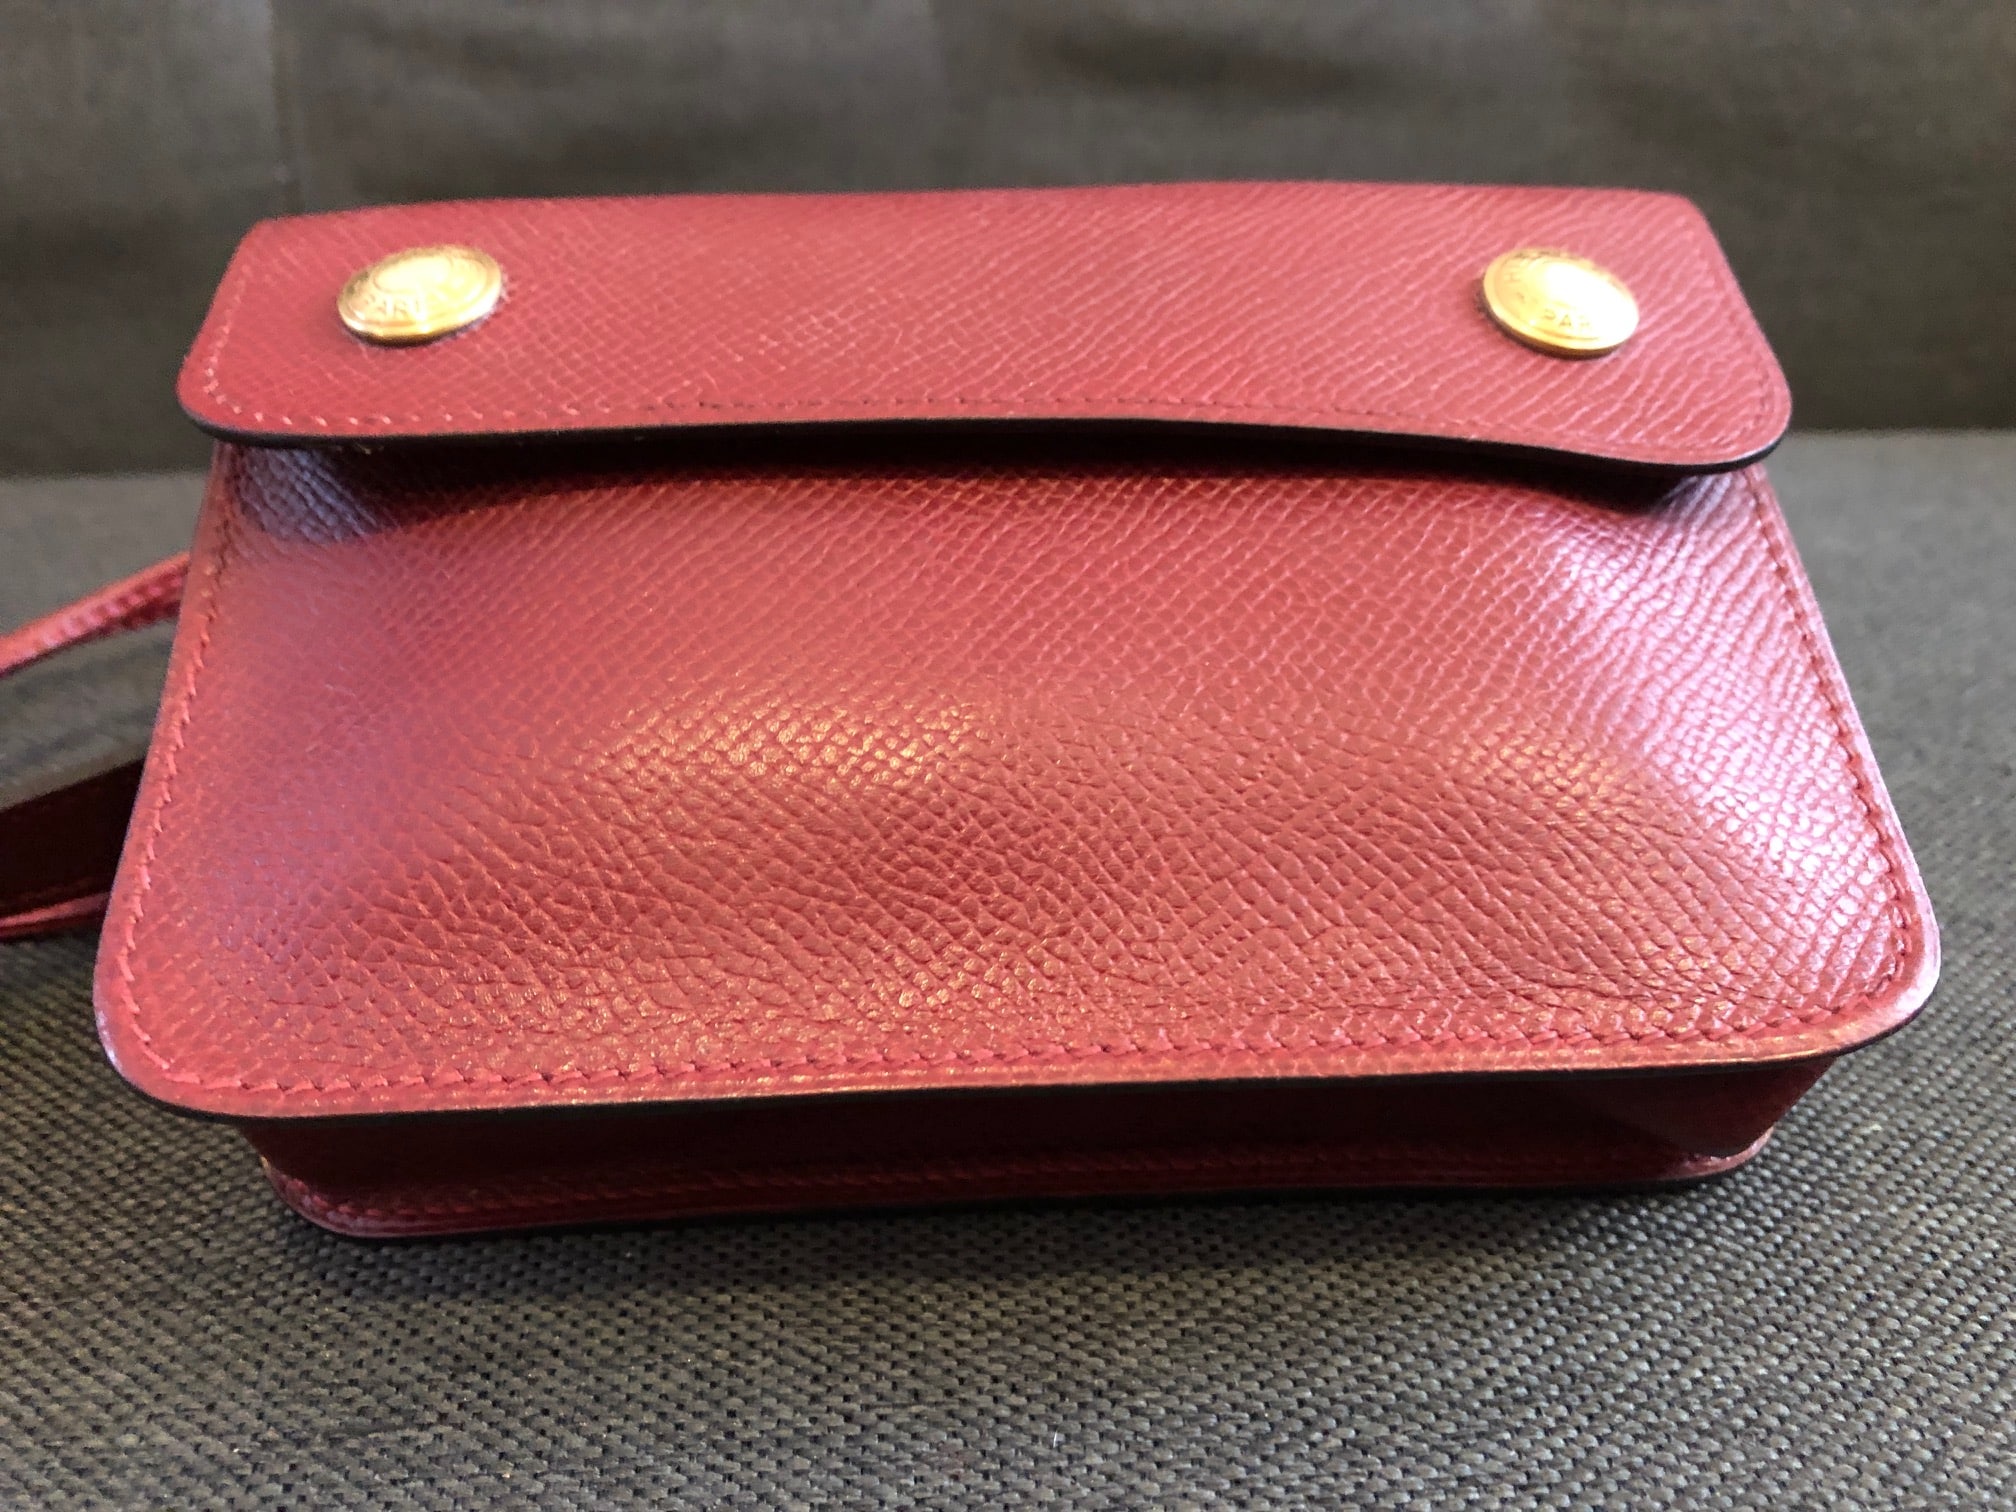 HERMES Waist Pouch Bag Red Leather France Vintage #BP773 Y